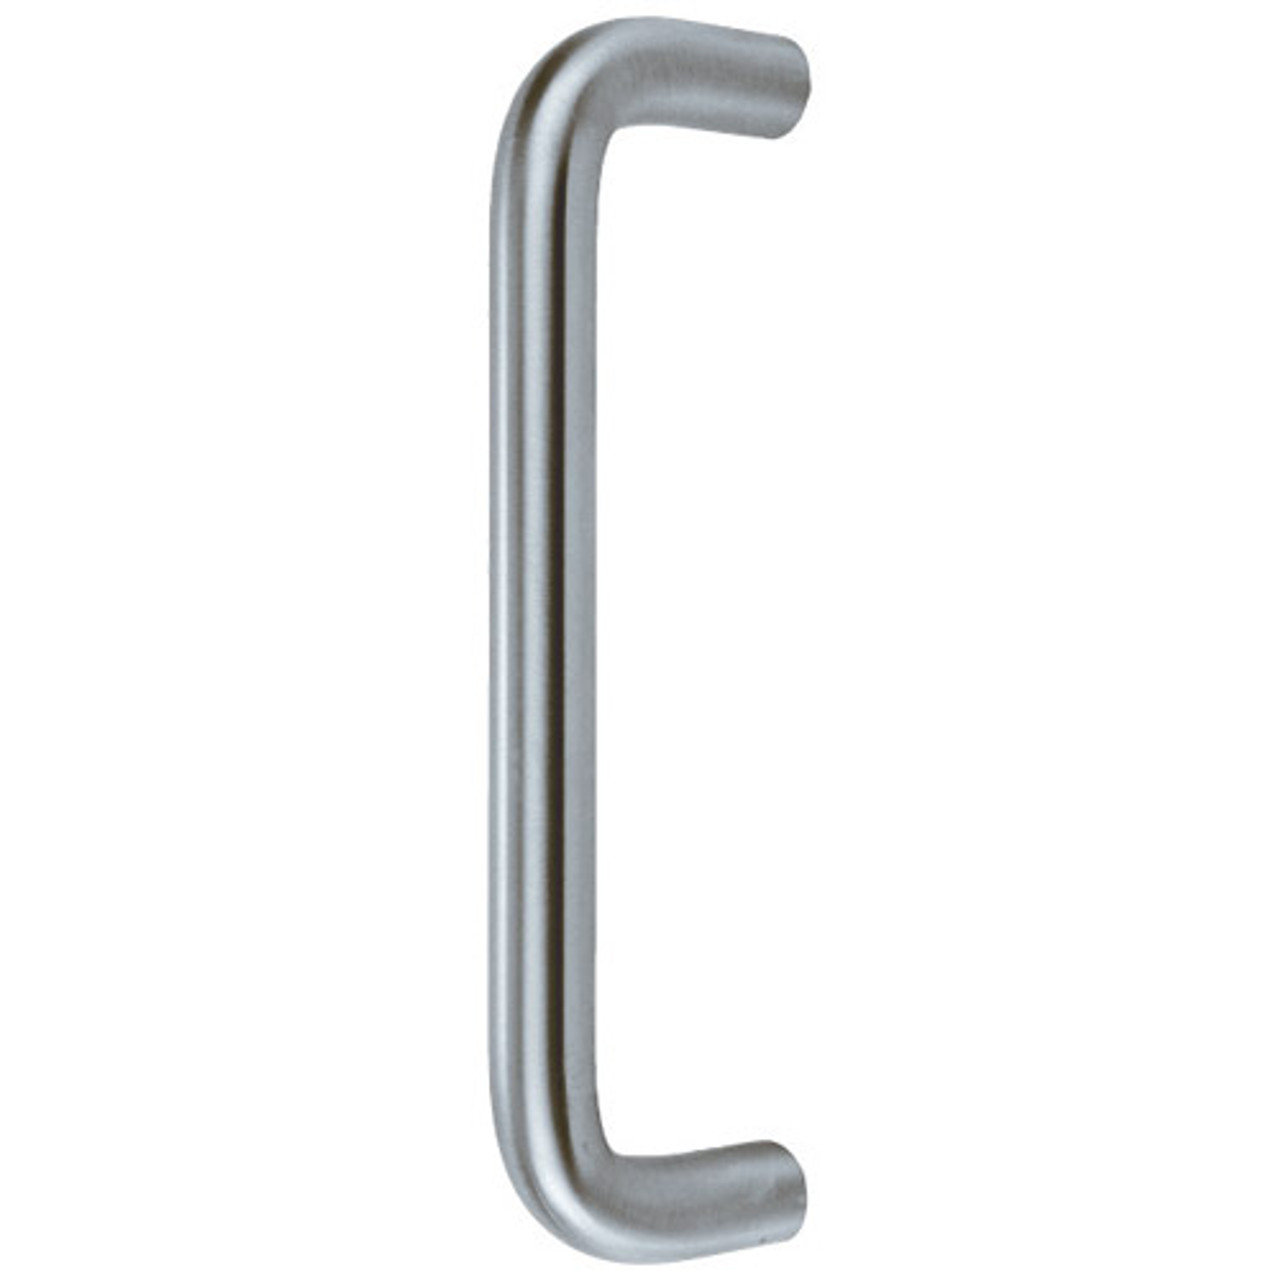 20-629 Don Jo 1" Round Door Pull in Bright Stainless Steel Finish